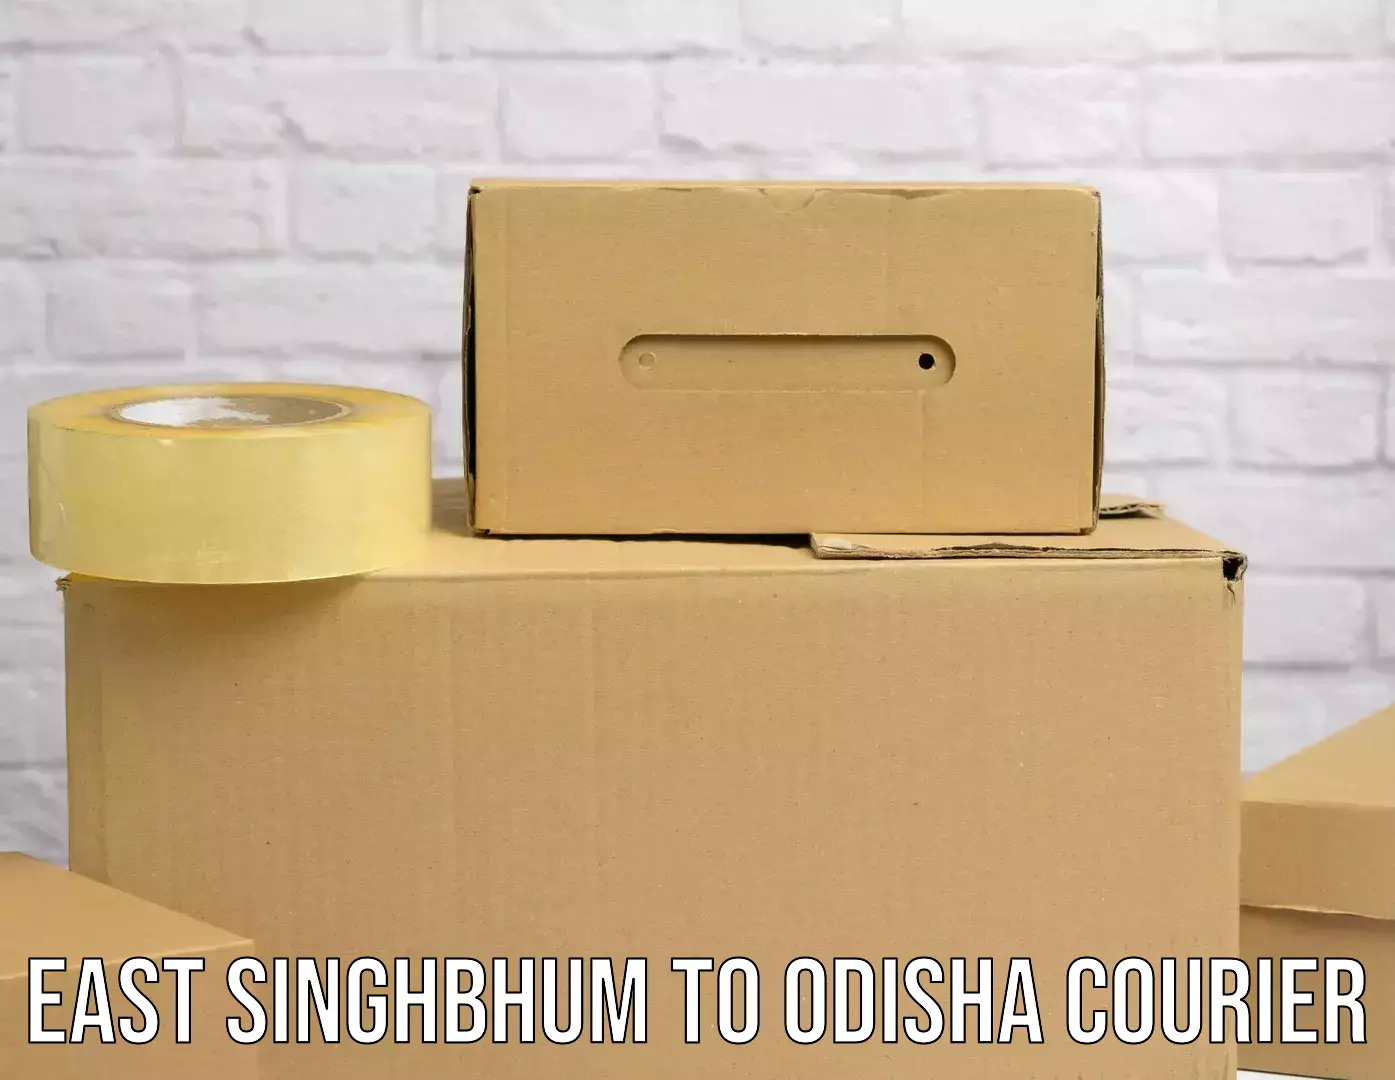 State-of-the-art courier technology East Singhbhum to Odisha